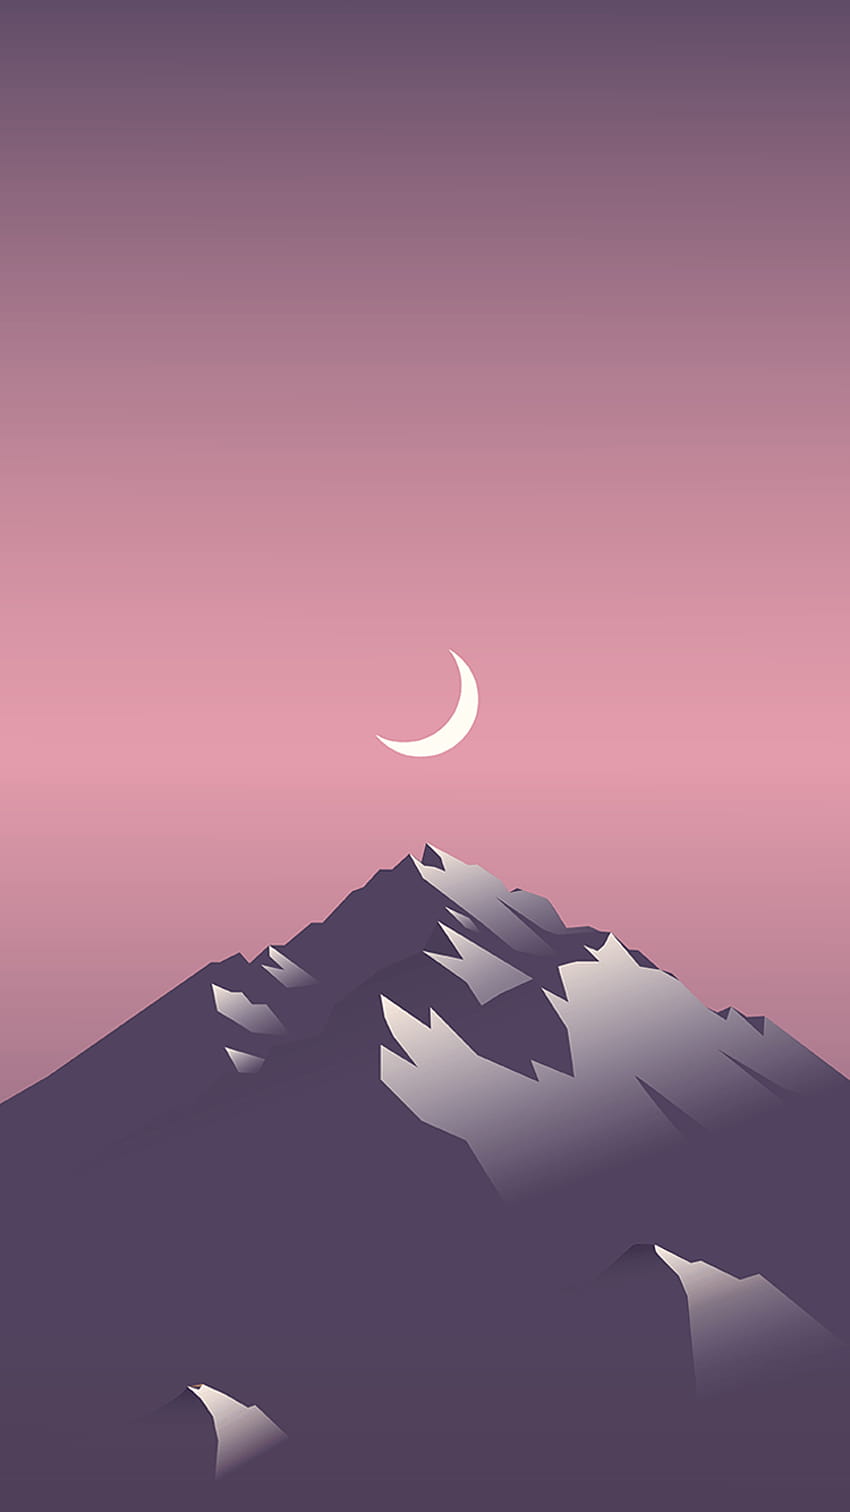 I created some landscapes for fun and decided to share them with you, fun landscape HD phone wallpaper